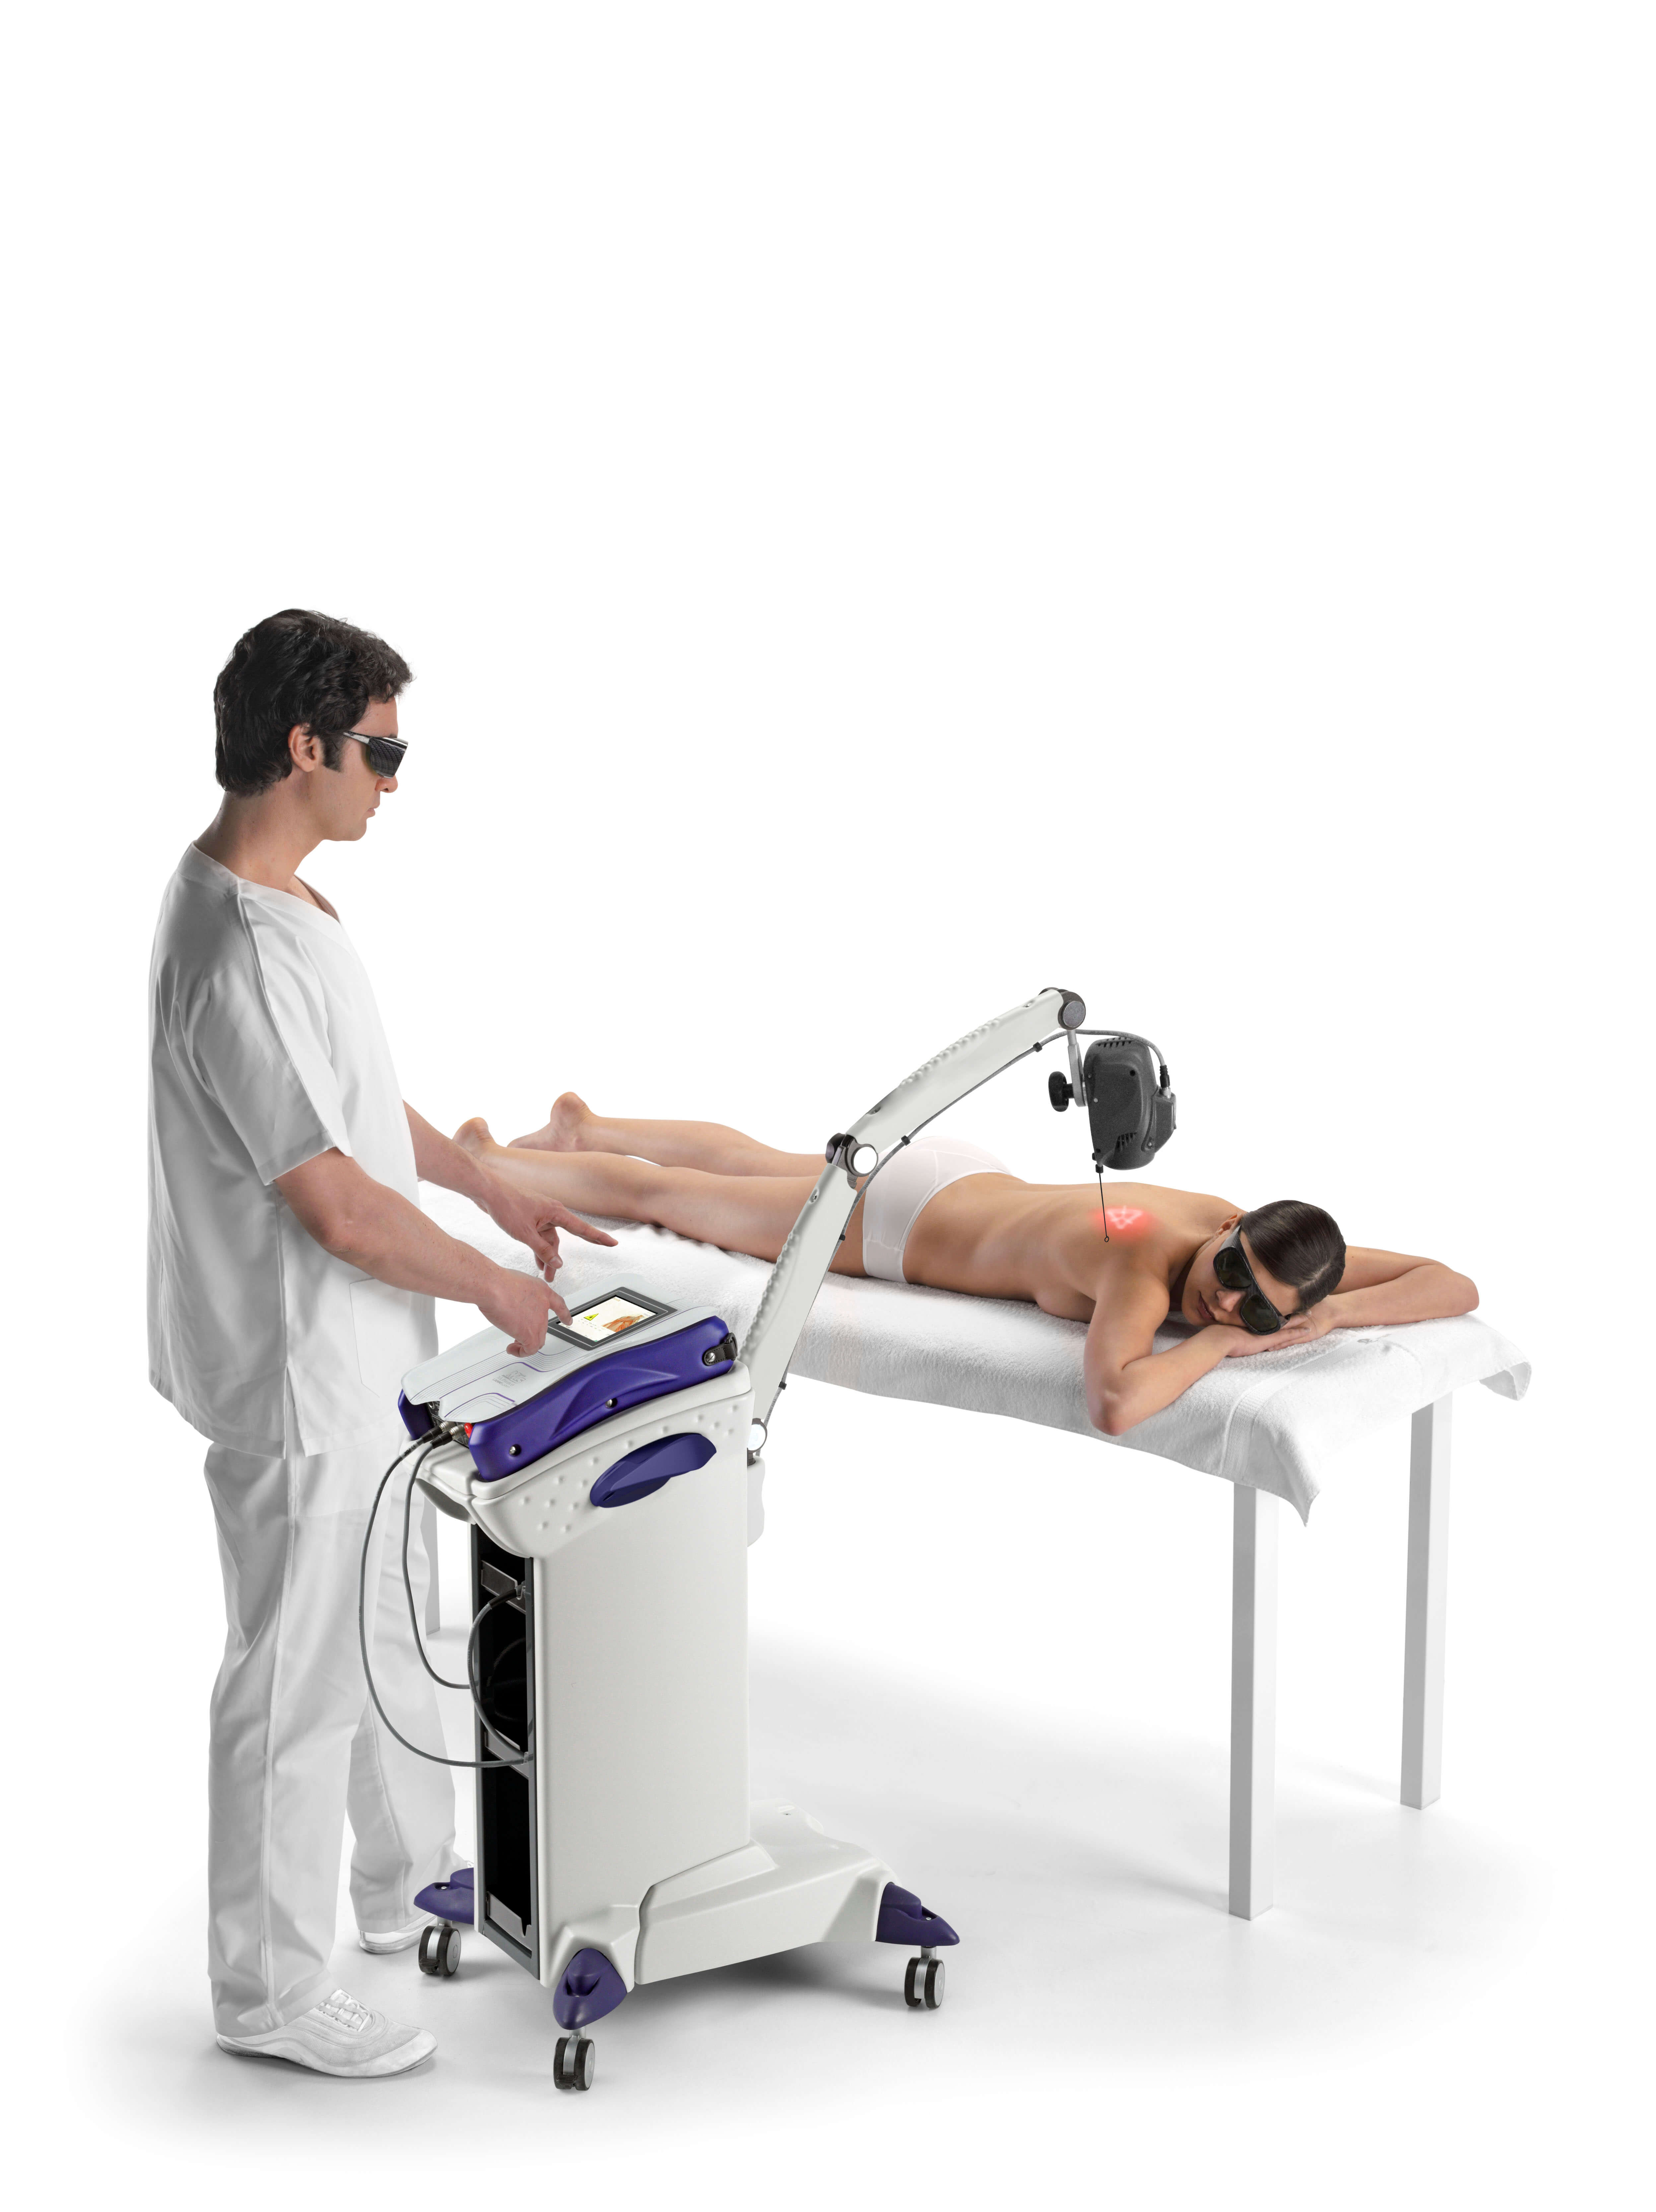 Mphi 5 - MLS Laser Therapy